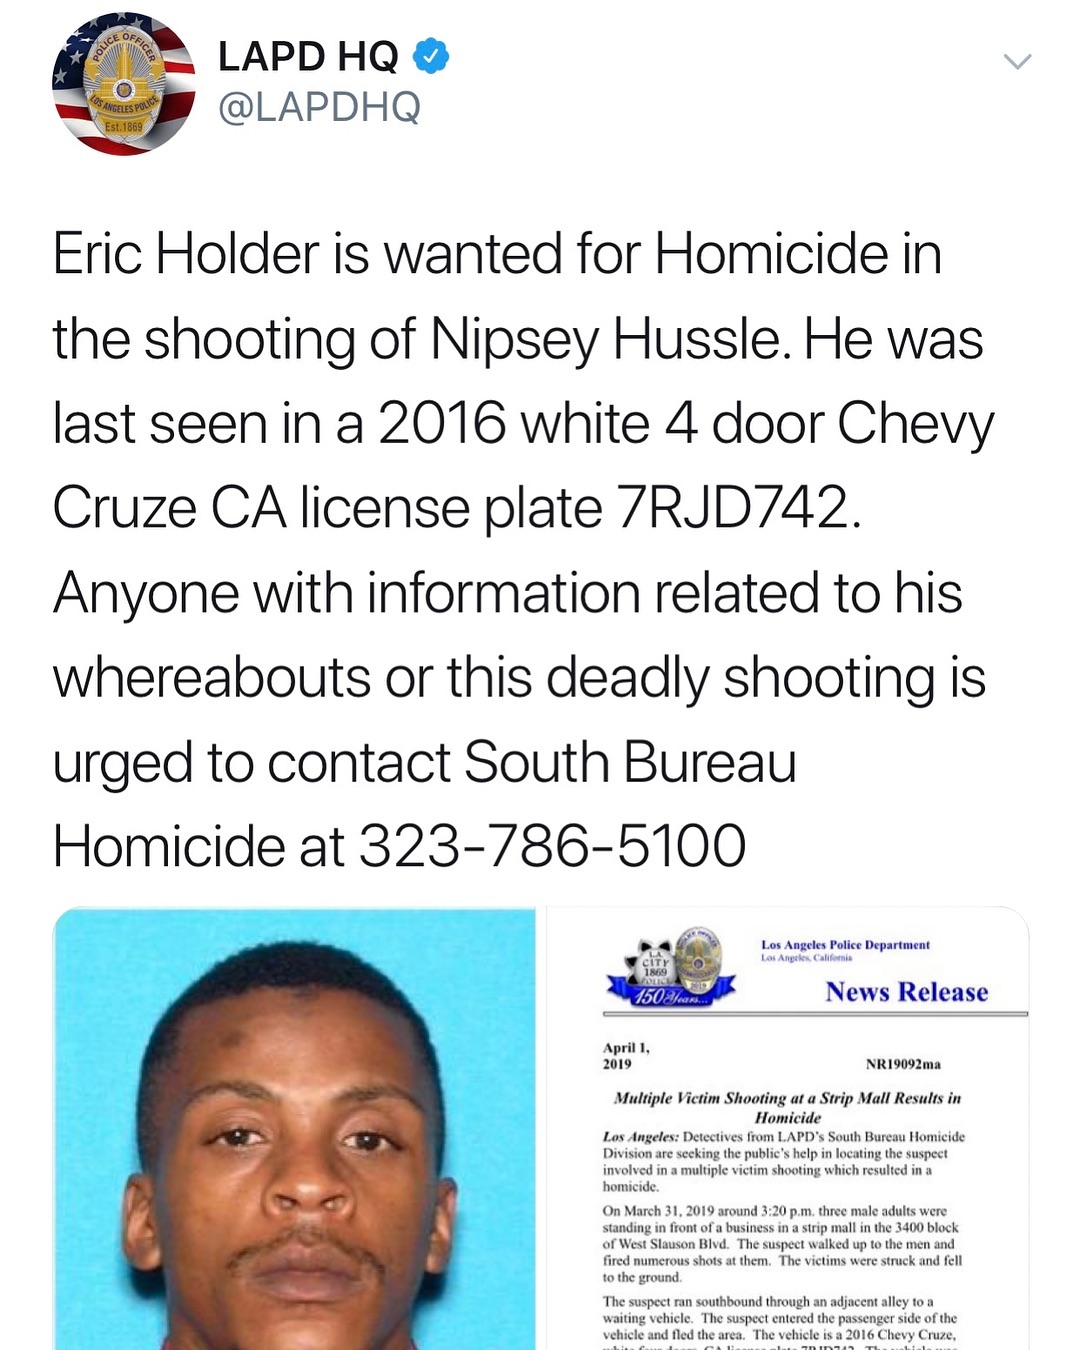 LAPD names the suspected killer of Nipsey Hussle.